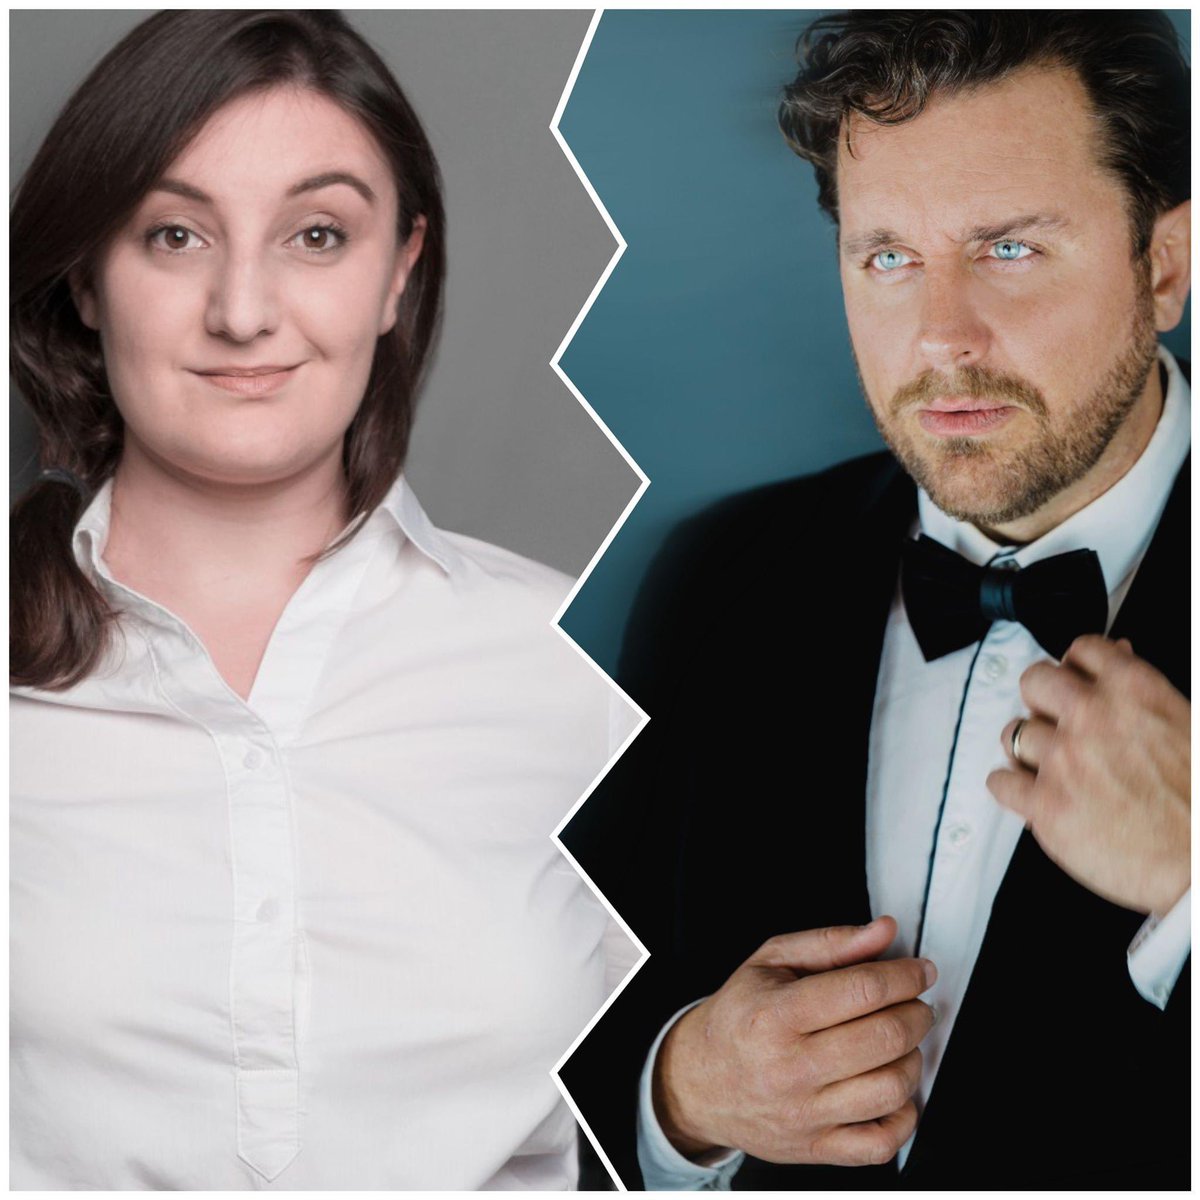 Michael Spyres sings the role of Énée&Beth Taylor that of Anna in #LesTroyens in a European tour, which opens on August 22 @FestivalBerlioz and leads them to the @SbgFestival, #Versailles, #Berlin& @bbcproms. Toi Toi Toi! @bethtaylormezzo @spikelmyers #bethtaylor #michaelspyres